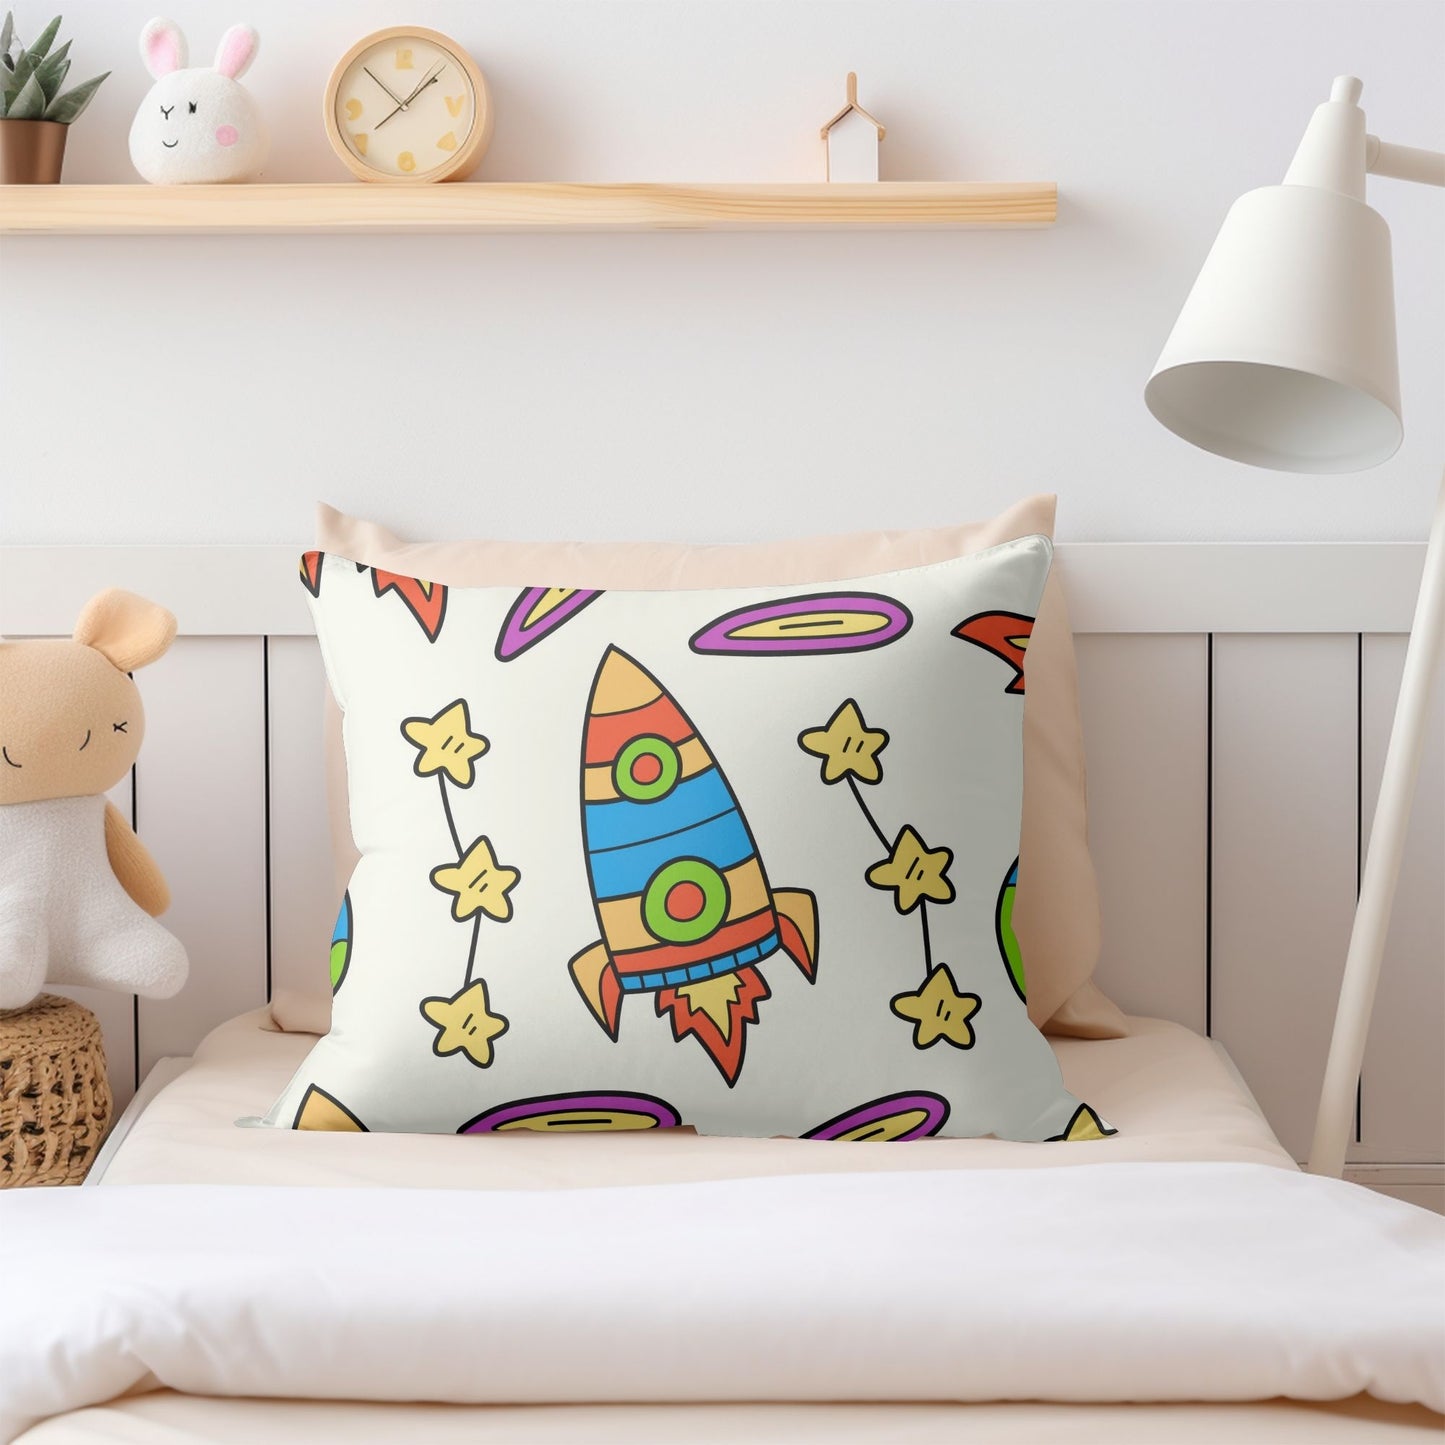 Colorful space-themed pillow designed for imaginative play and relaxation.